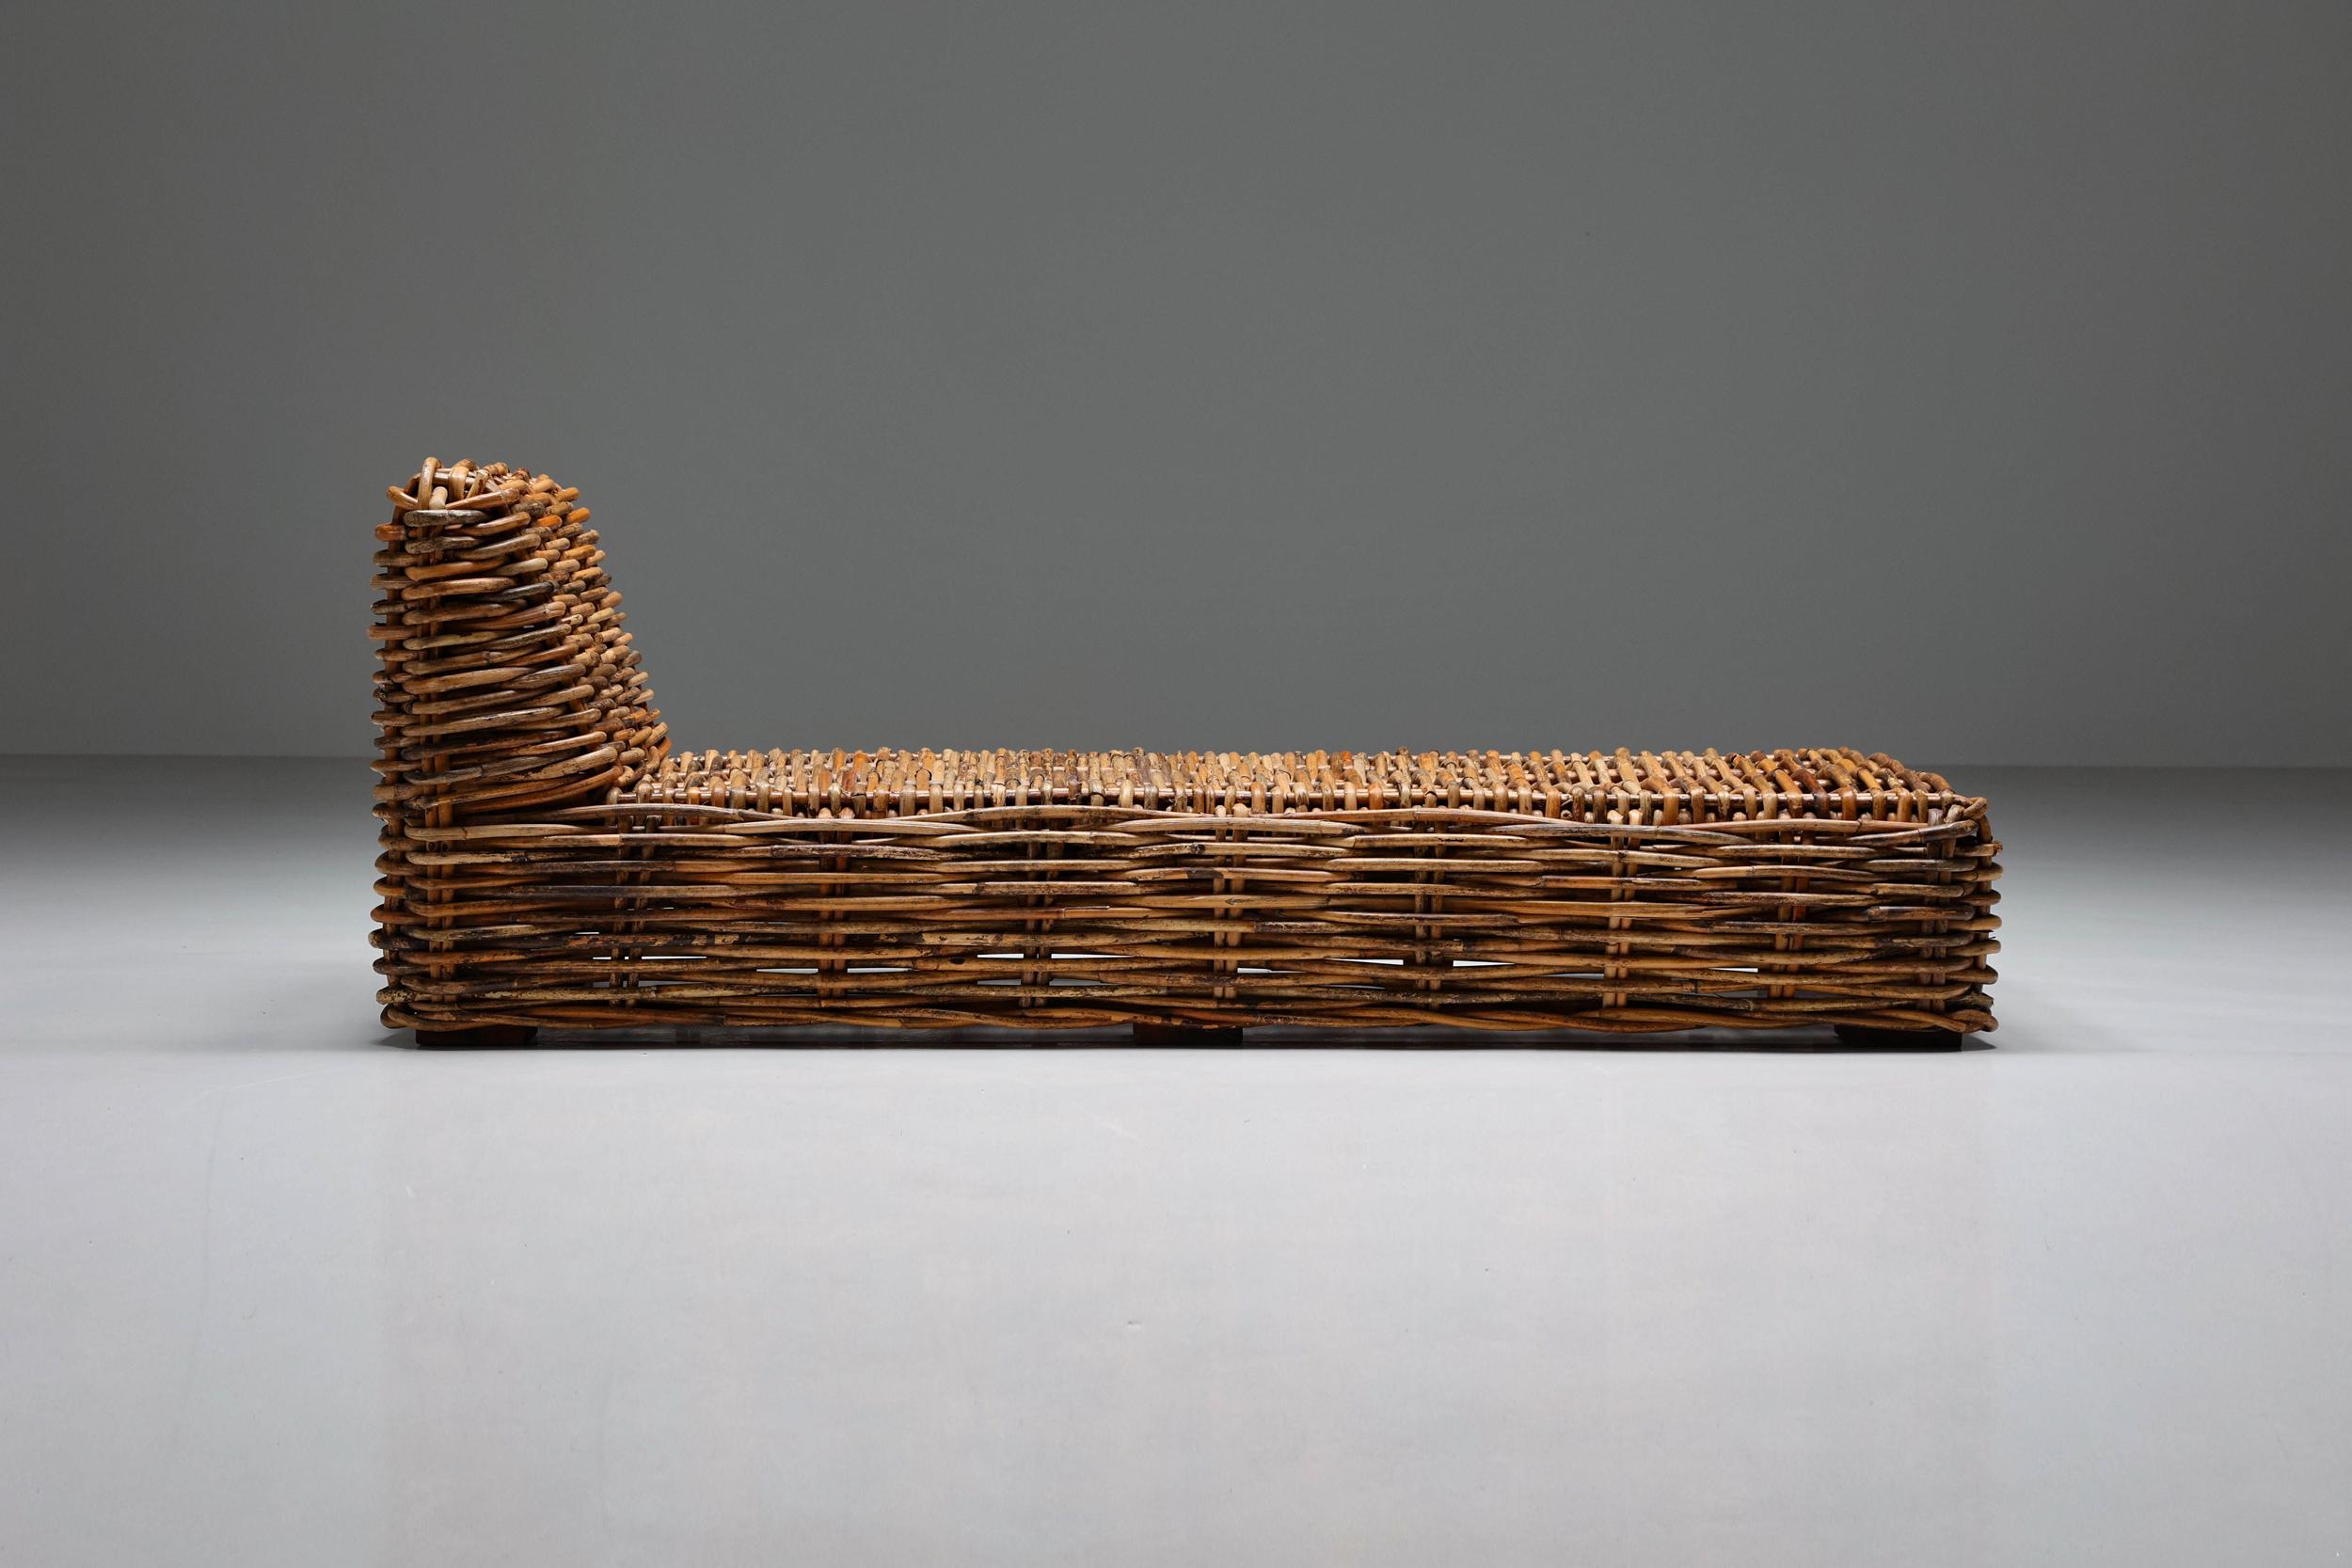 Mid-20th Century Rattan Day Bed, Chaise Longues, 1960's, Mid-Century Modern